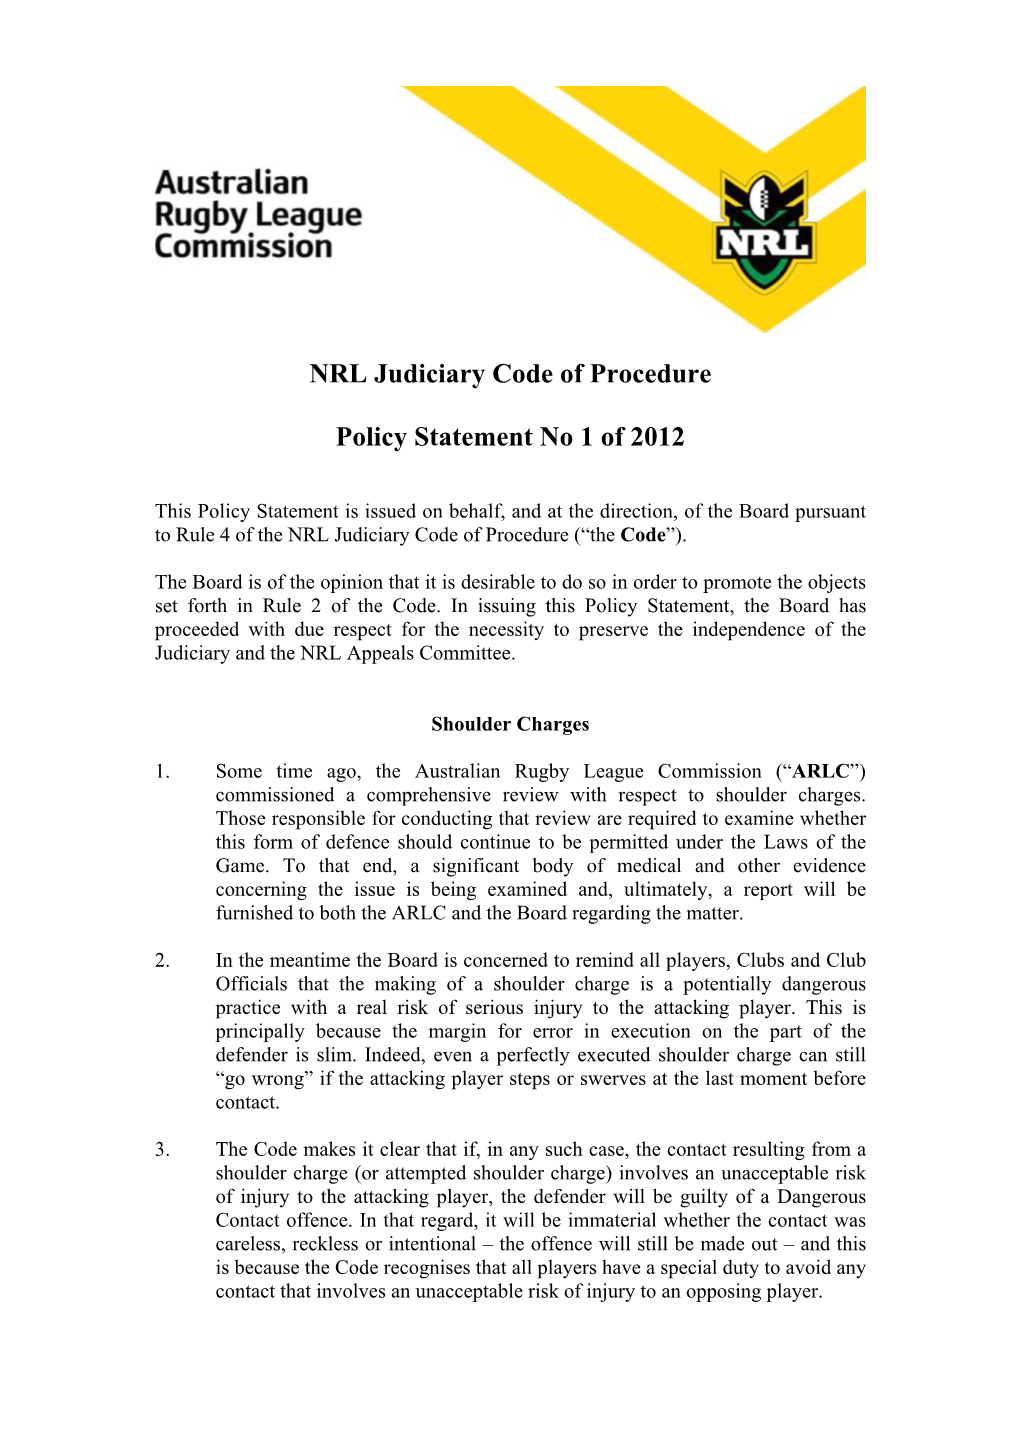 NRL Judiciary Code of Procedure Policy Statement No 1 of 2012